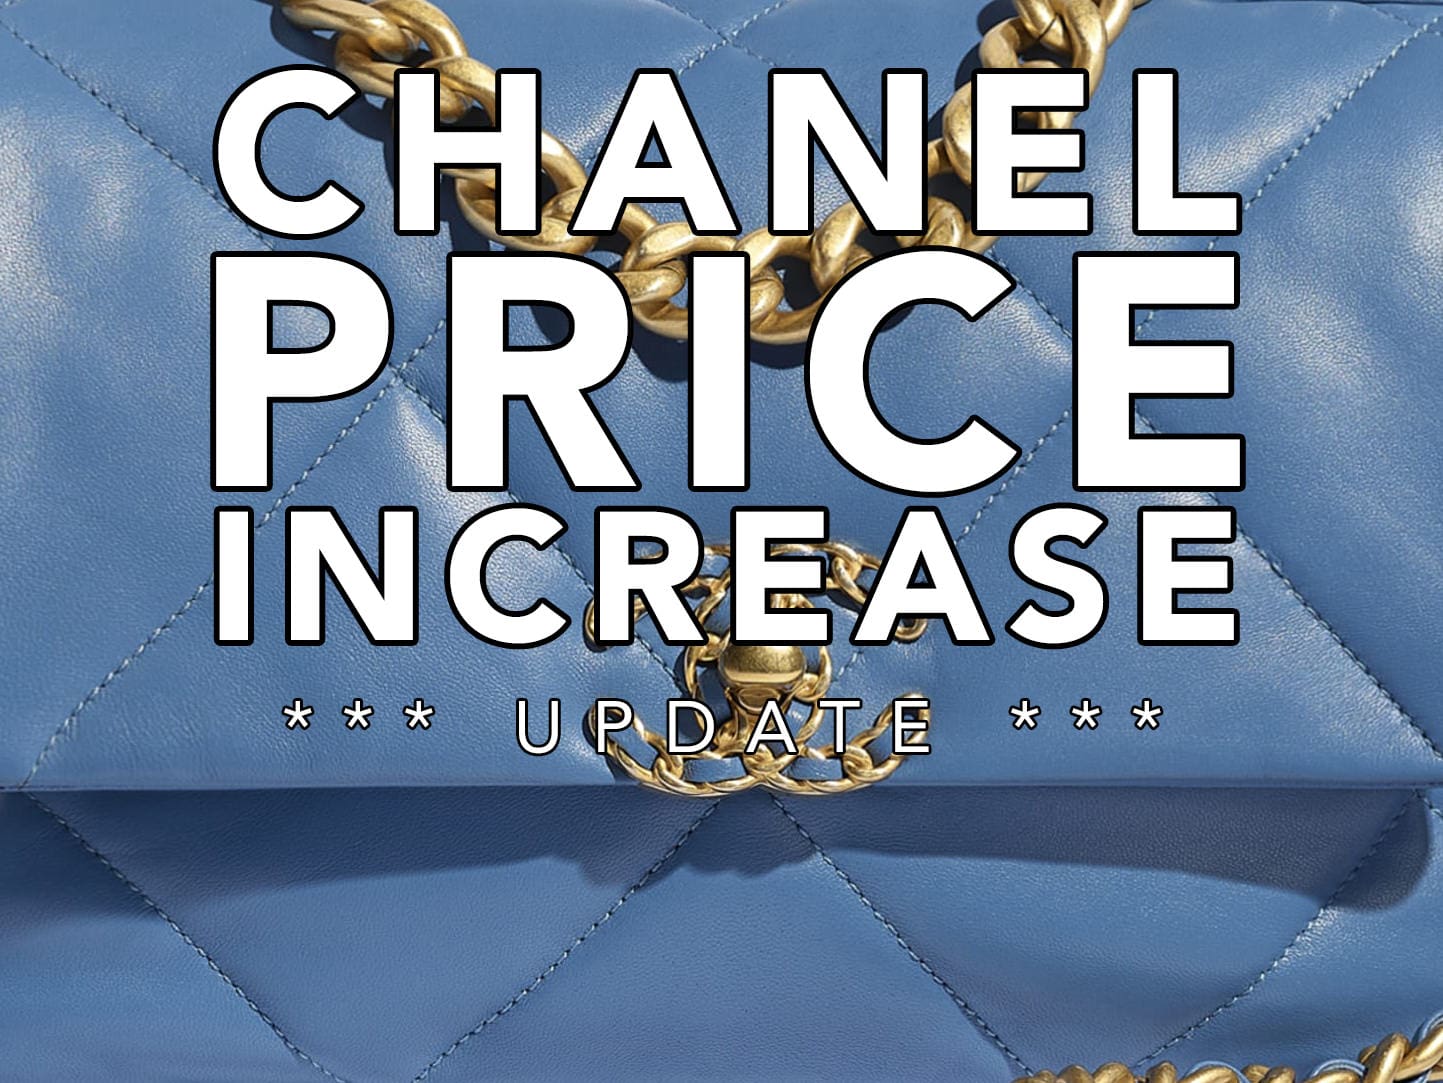 Chanel Price Increase 2020 US Update